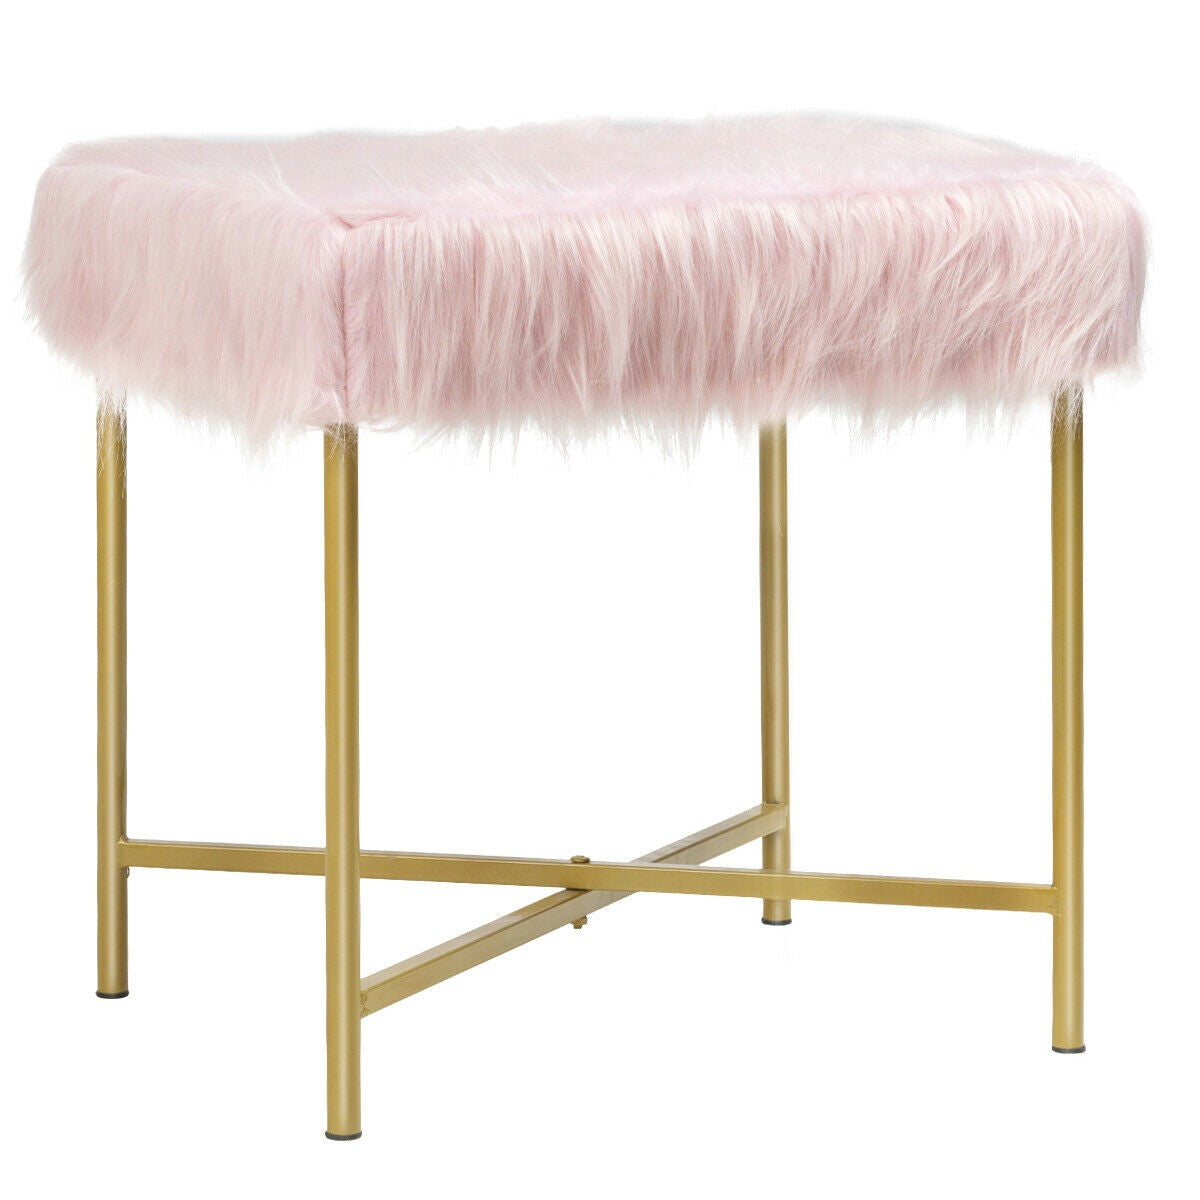 Ottoman Footrest W/ Padded,Luxurious Faux Fur Covered Seat